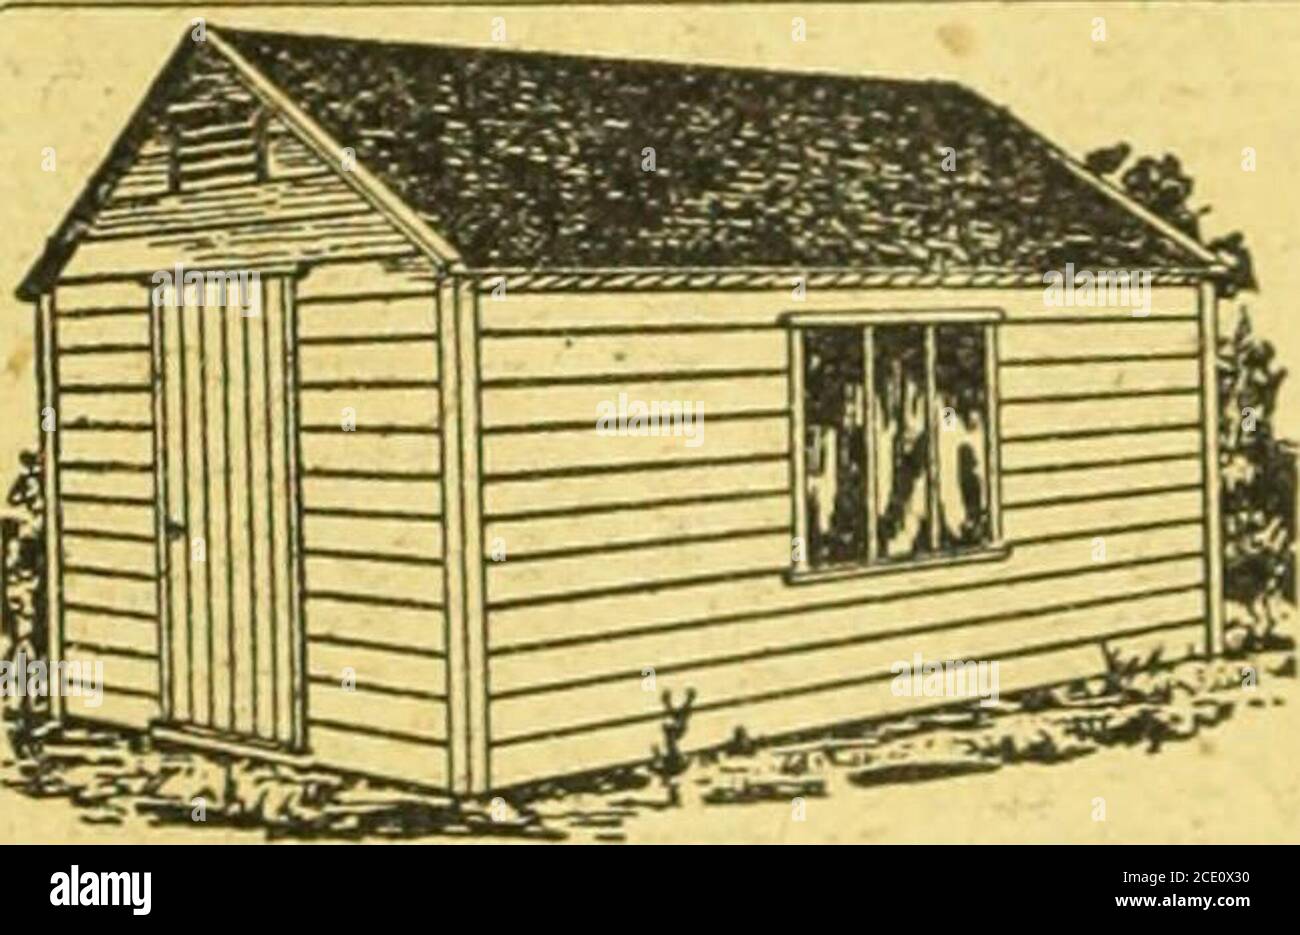 . Farmer and stockbreeder . GENERAL STORE HUT. 7 ft long by 6 ft wide by 5 ft to Eavee « ,1 „ 5 „ 10 „ ,. 7 „ „ 5 - 12 „ 8 „ » s „ 15 „ .. » &gt;. - « - 20 „ ., 10 „ 8 „ 25 „ „ 12 „ » « „ so „ „ 14 „ 7 „ £10 012 1017 1025 034 050 077 0110 0 0 each0 0 ,. • .,0 ,. • ..0 „0 „ It altered for Folding Doors In one end ol larger stres, suitabletor Motors, etc., £3 extra. THE CANTEEN. 7 ft long by 6 ft wide by fl ft. front e . 7 - . •. - io » - i* - „ 14 „ £10 012 1017 1025 034 050 •77 0 110 0 Hake orand Intensive Houses for Poultry and nnmapurposes. o „0 iio „ 0 H o ,.ether each Stock Photo